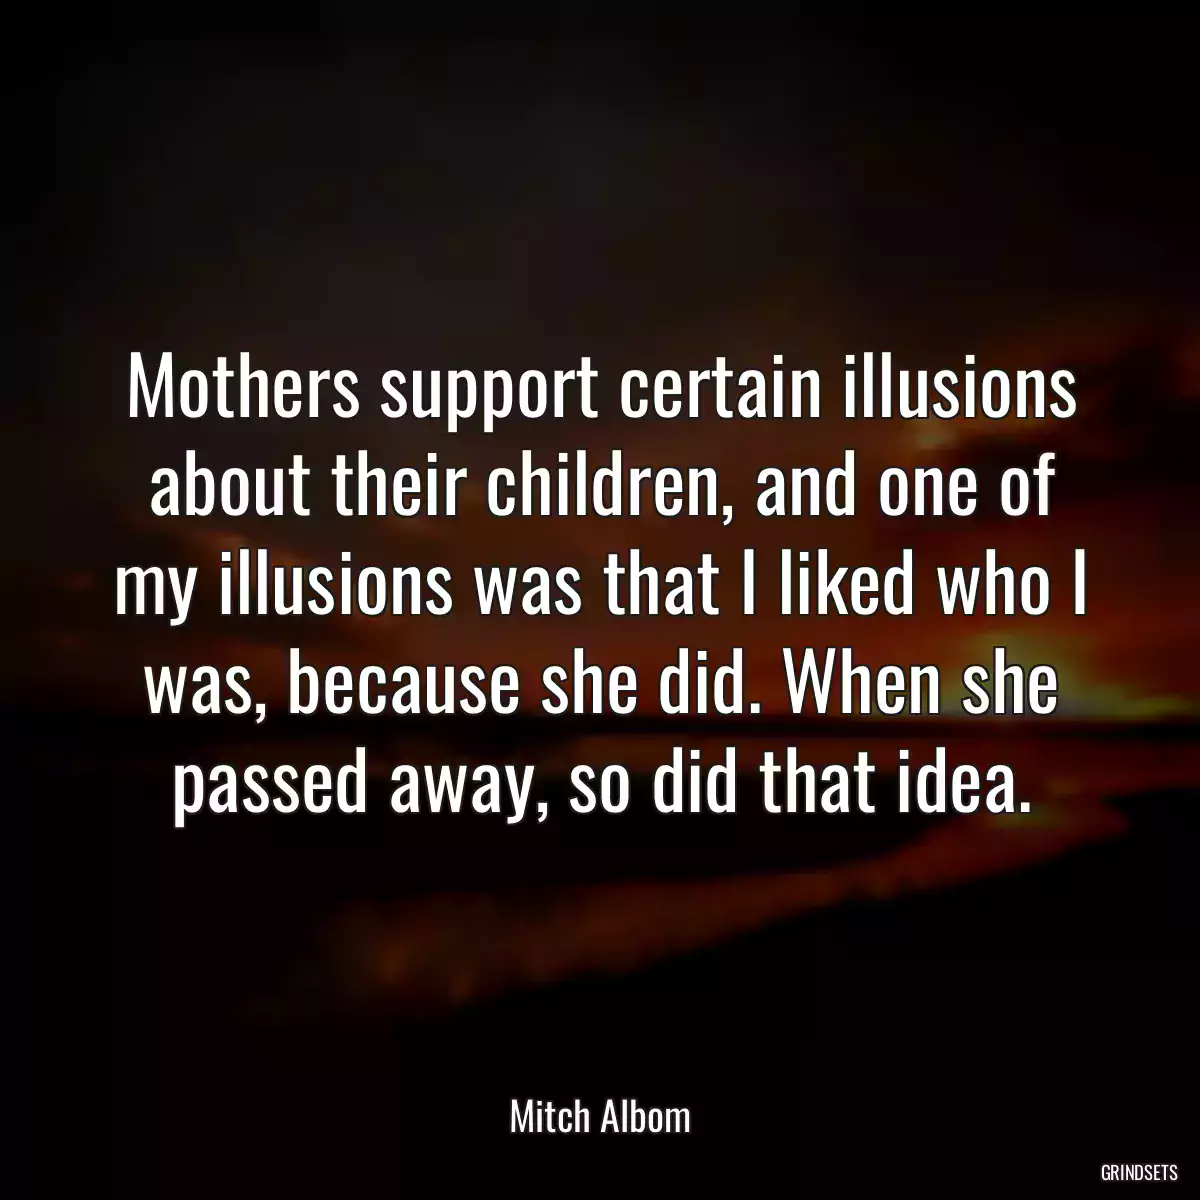 Mothers support certain illusions about their children, and one of my illusions was that I liked who I was, because she did. When she passed away, so did that idea.